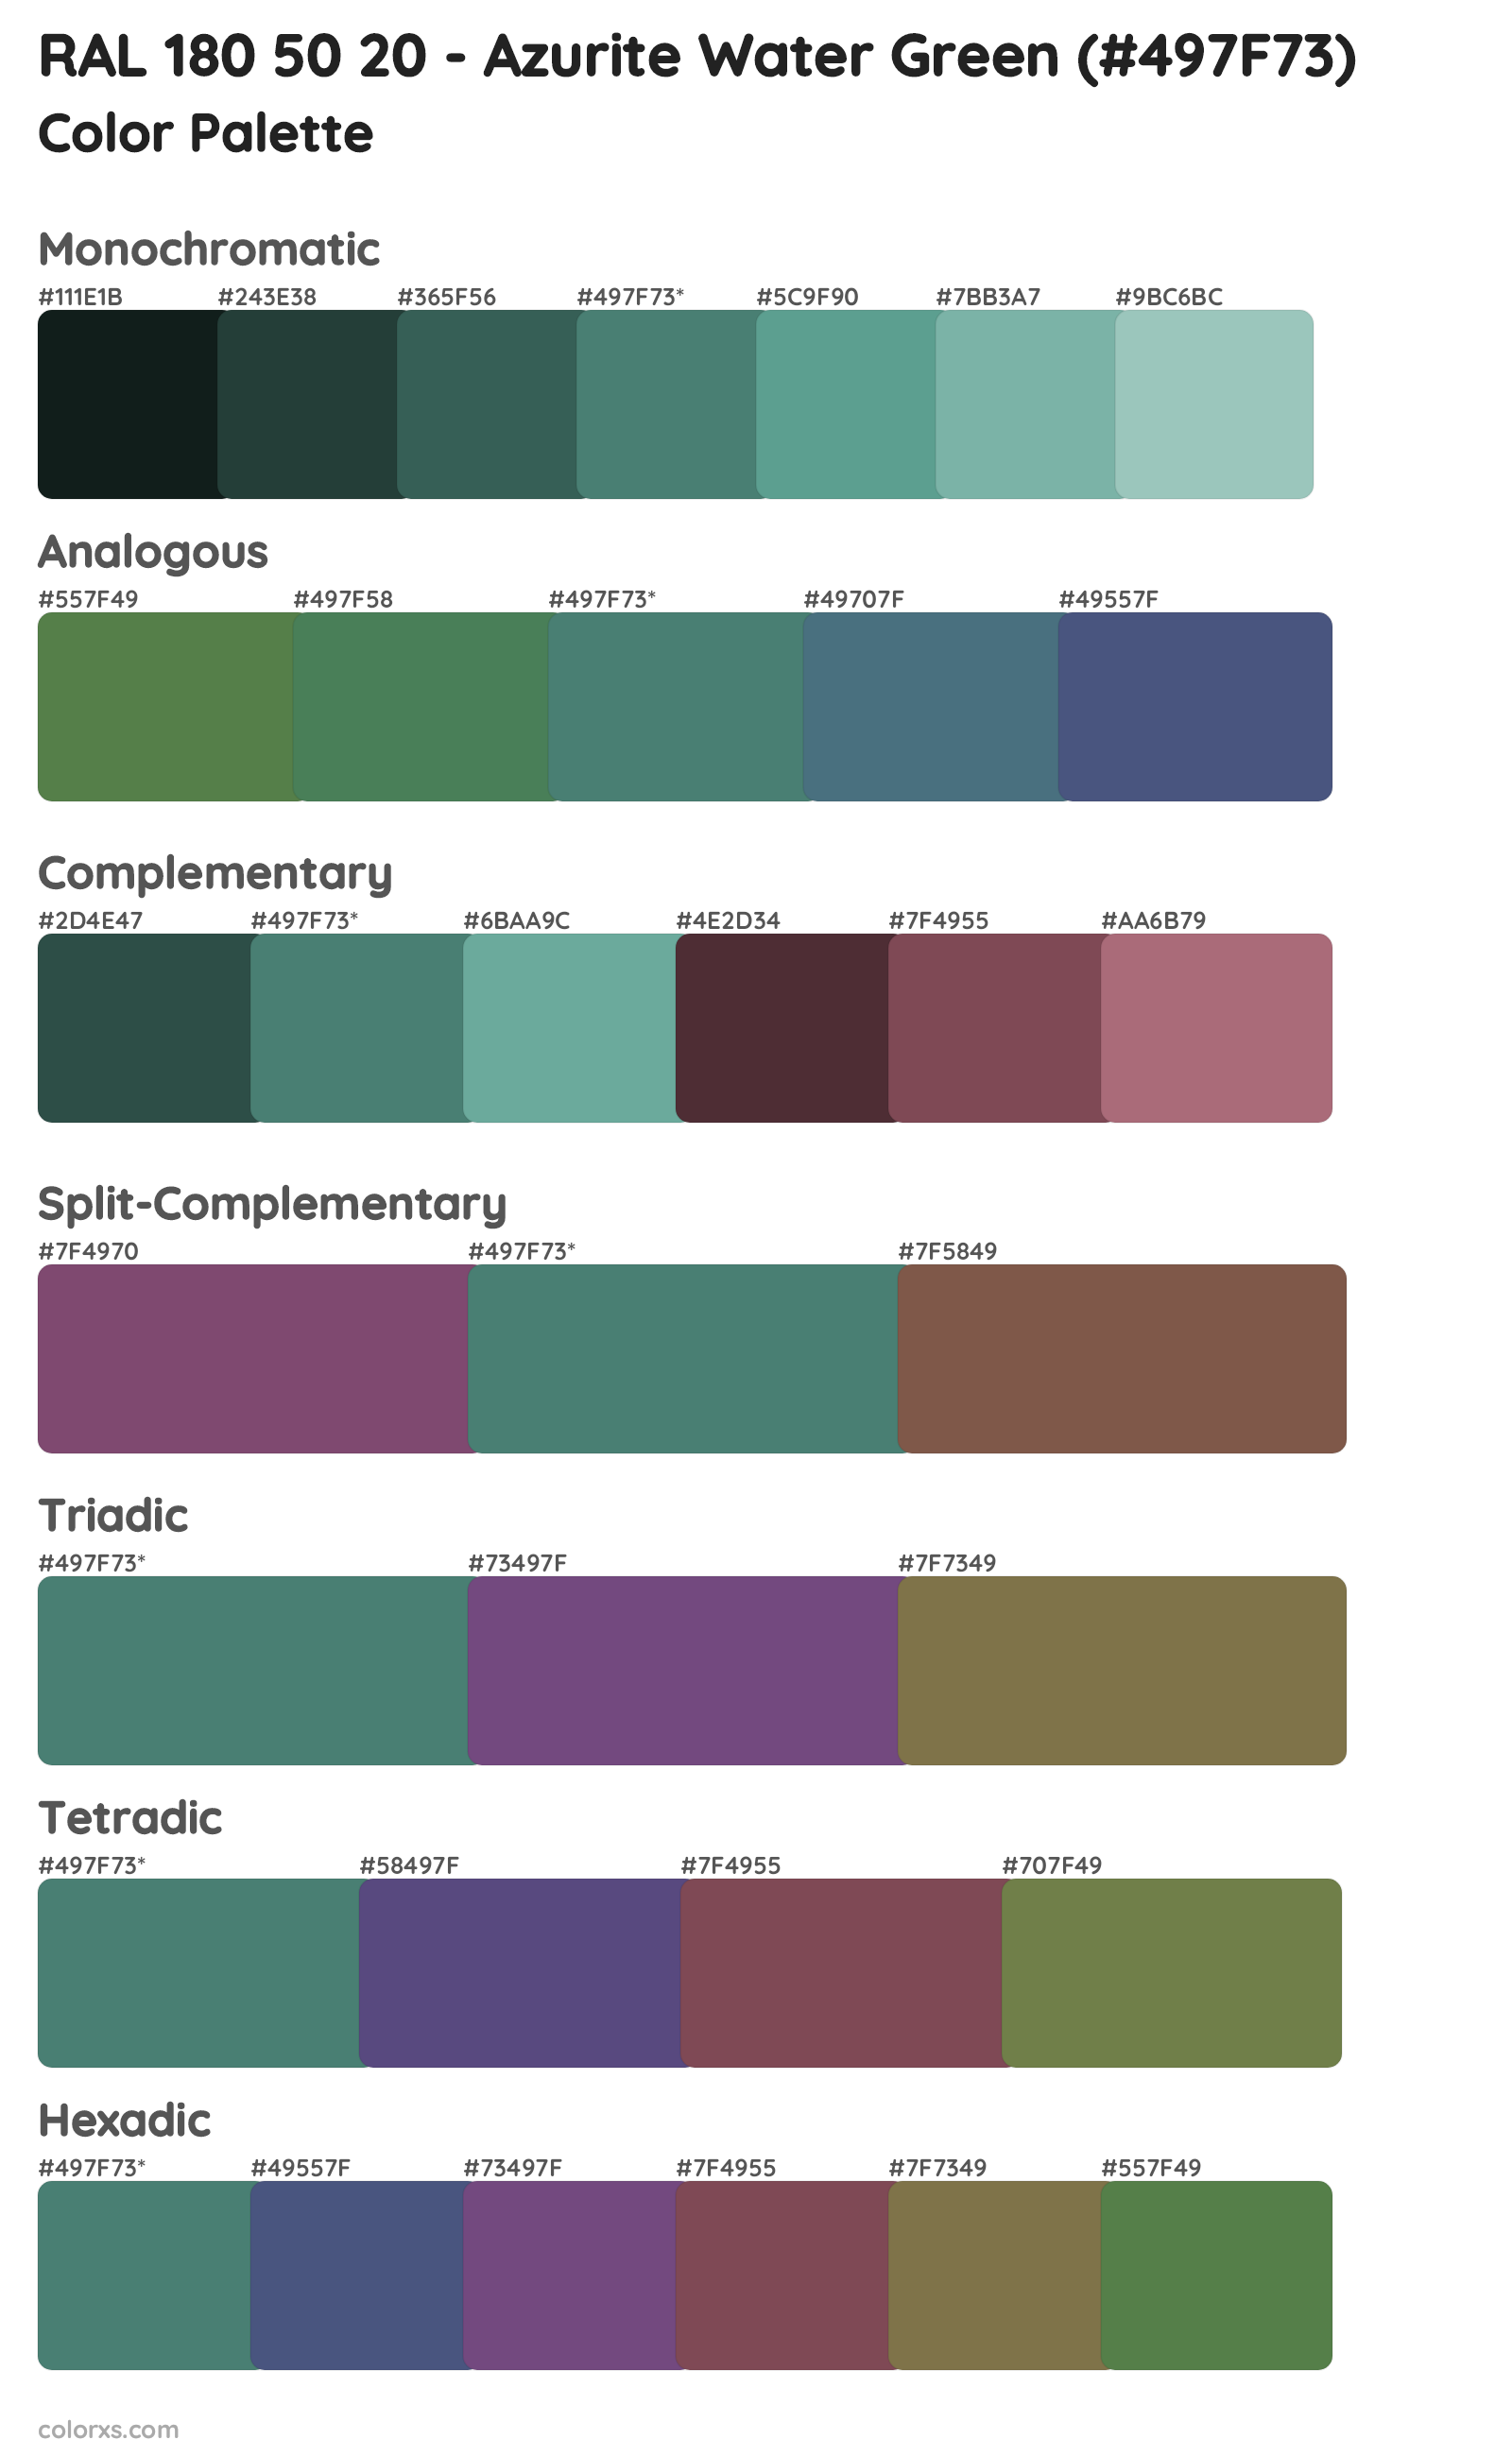 RAL 180 50 20 - Azurite Water Green Color Scheme Palettes